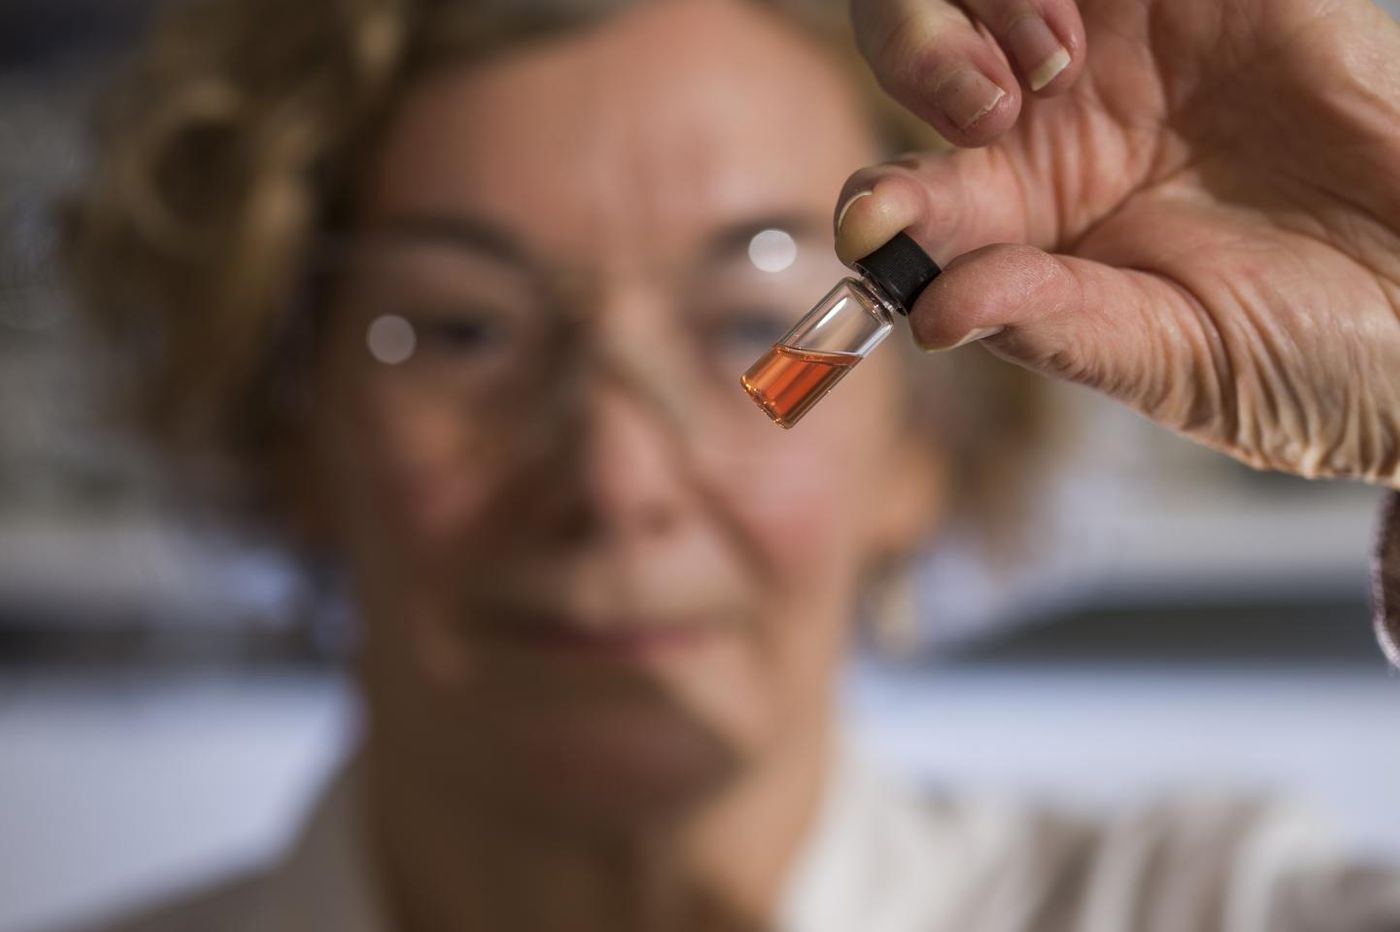 Biogeochemistry Lab Manager Janet Hope from the ANU Research School of Earth Sciences holds a vial of pink colored porphyrins representing the oldest intact pigments in the world. / Credit: The Australian National University